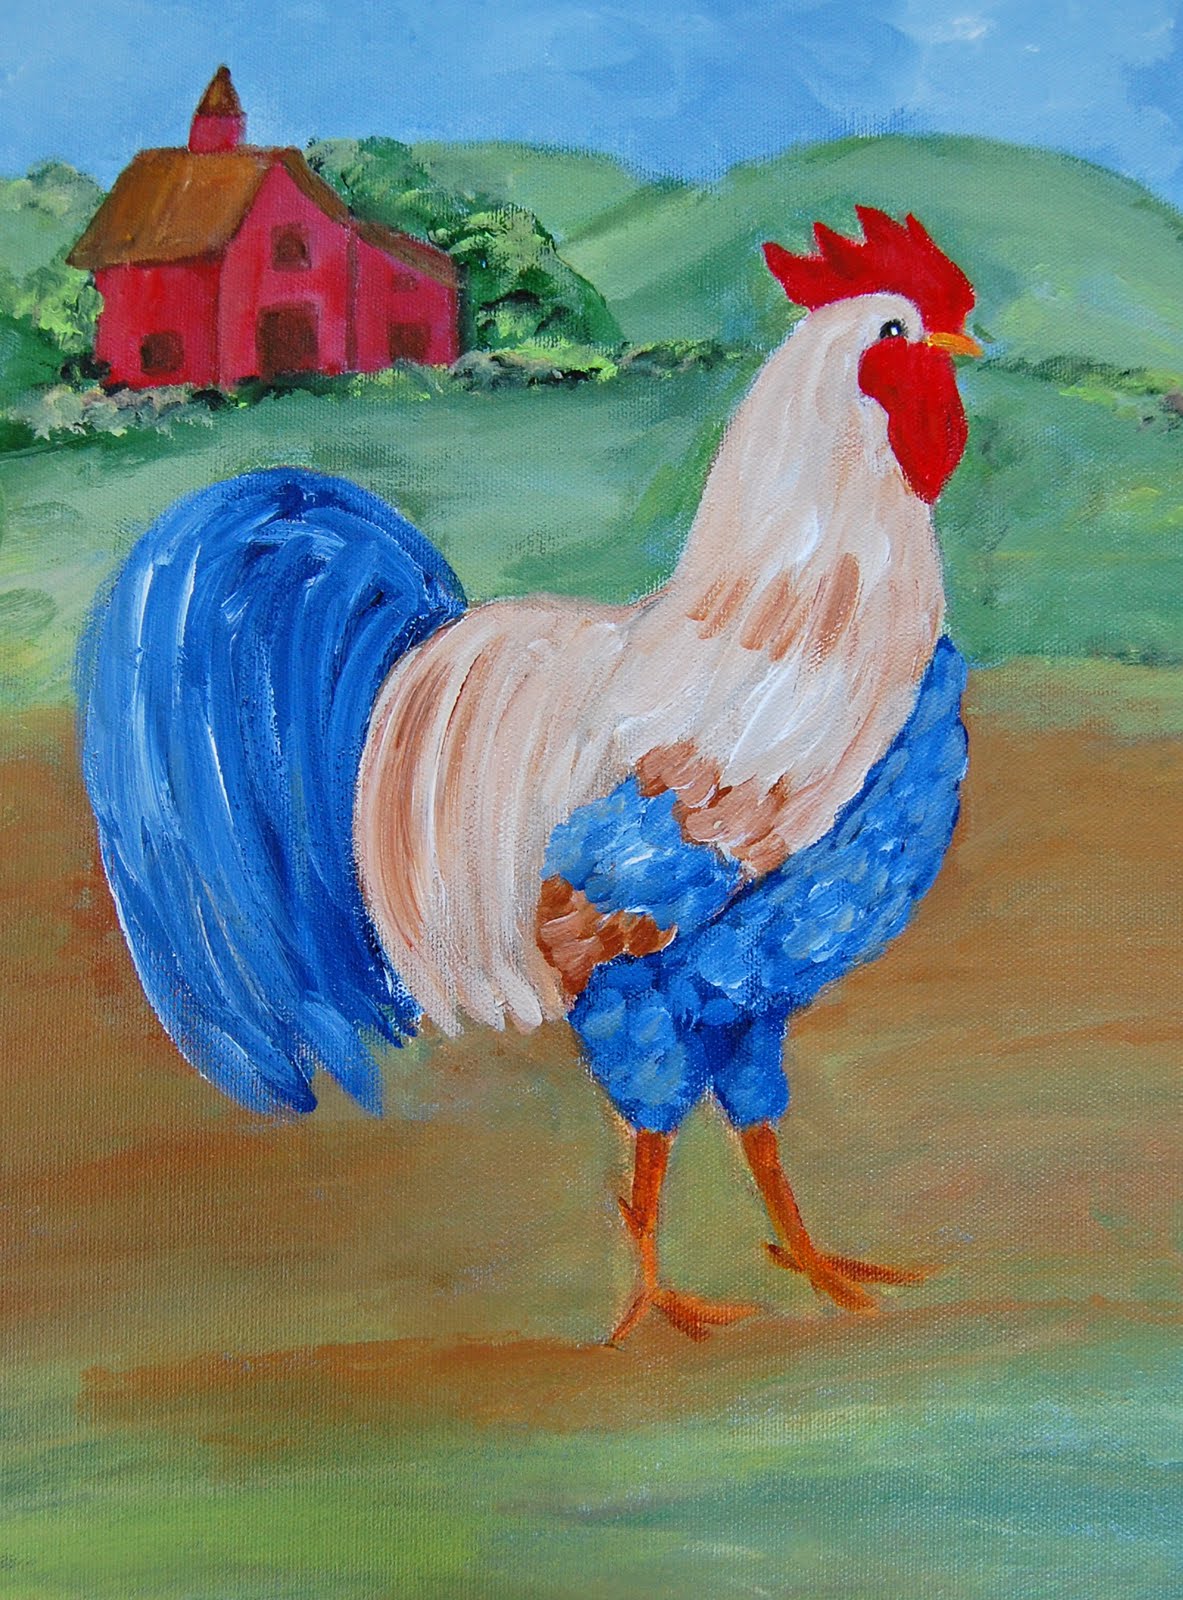 My Painted Garden Let's Paint a Rooster